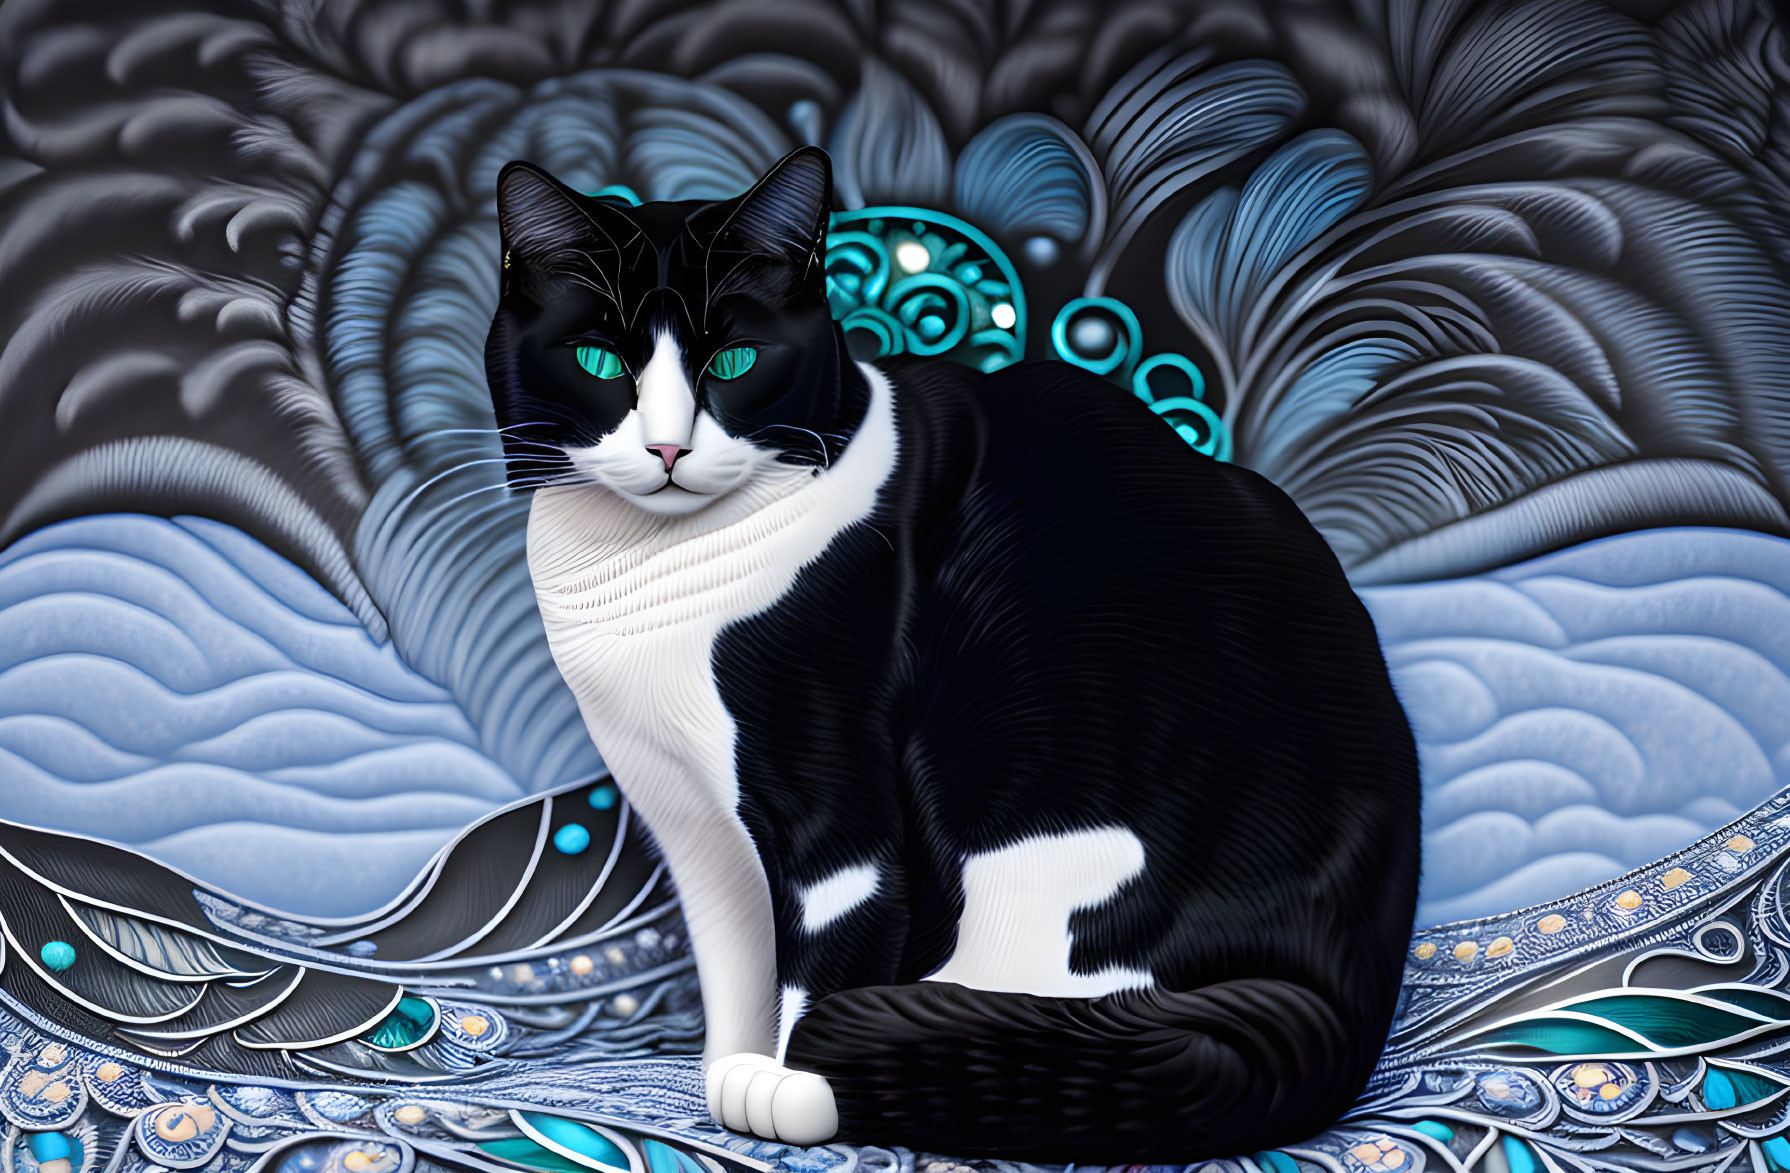 Black and White Cat with Green Eyes on Blue and White Patterned Background